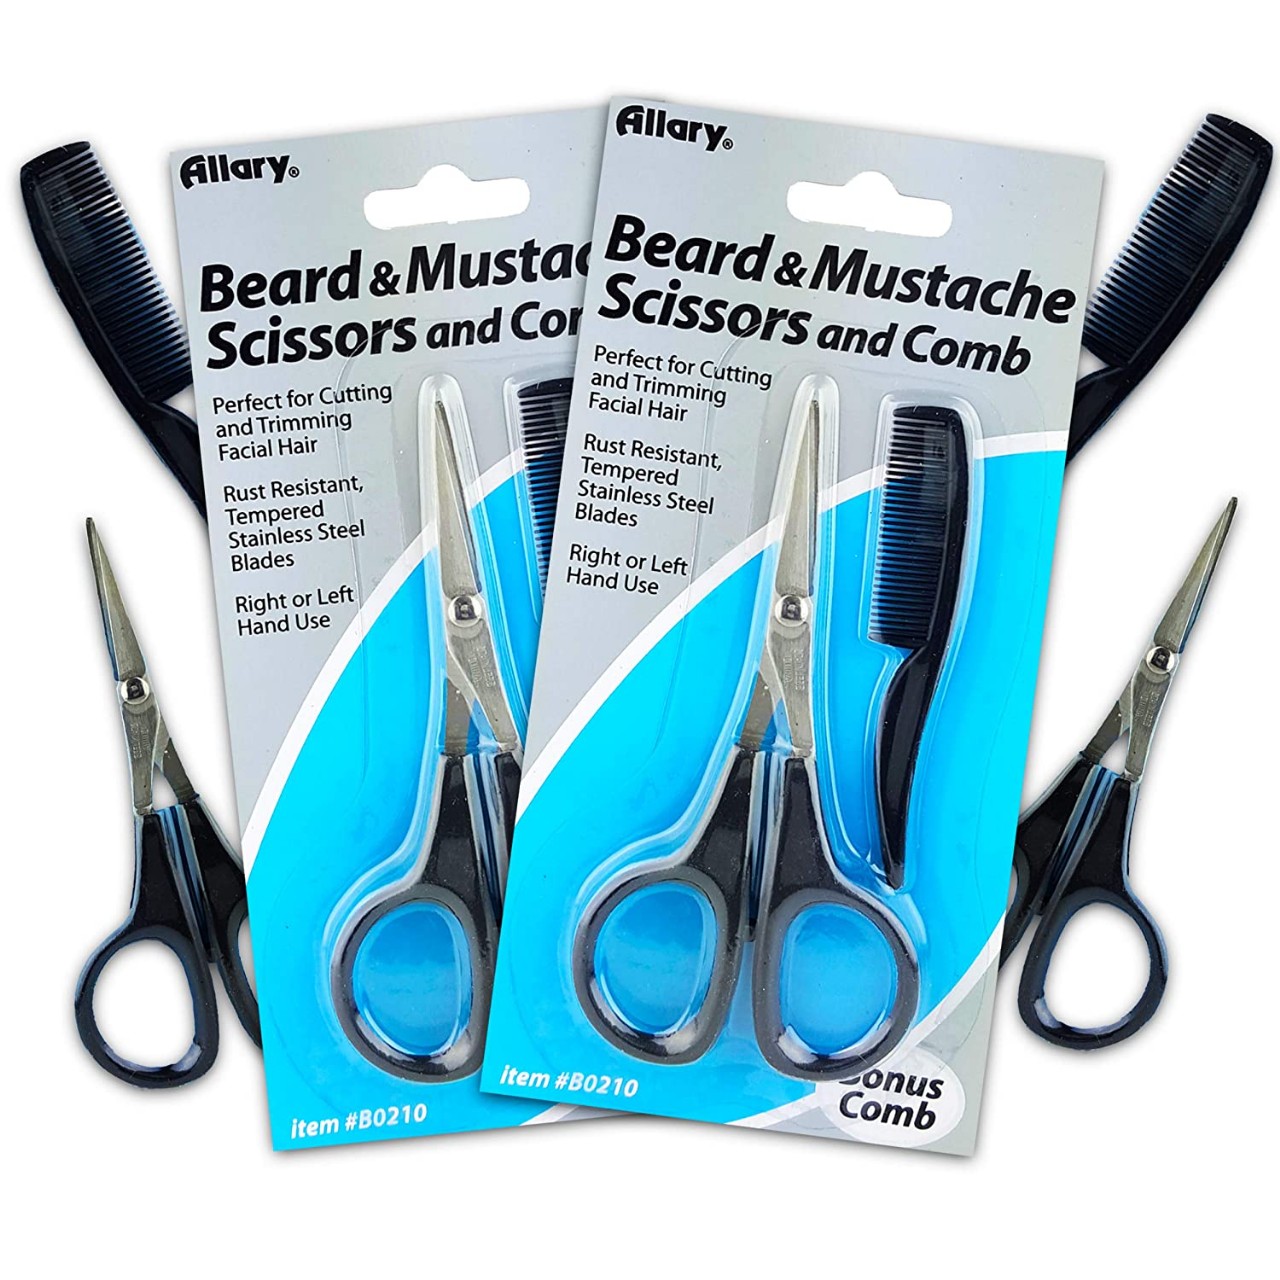 Beard and Mustache Grooming Kit for Men - 2 Sets, Beard Trimming Scissors Shears with Comb